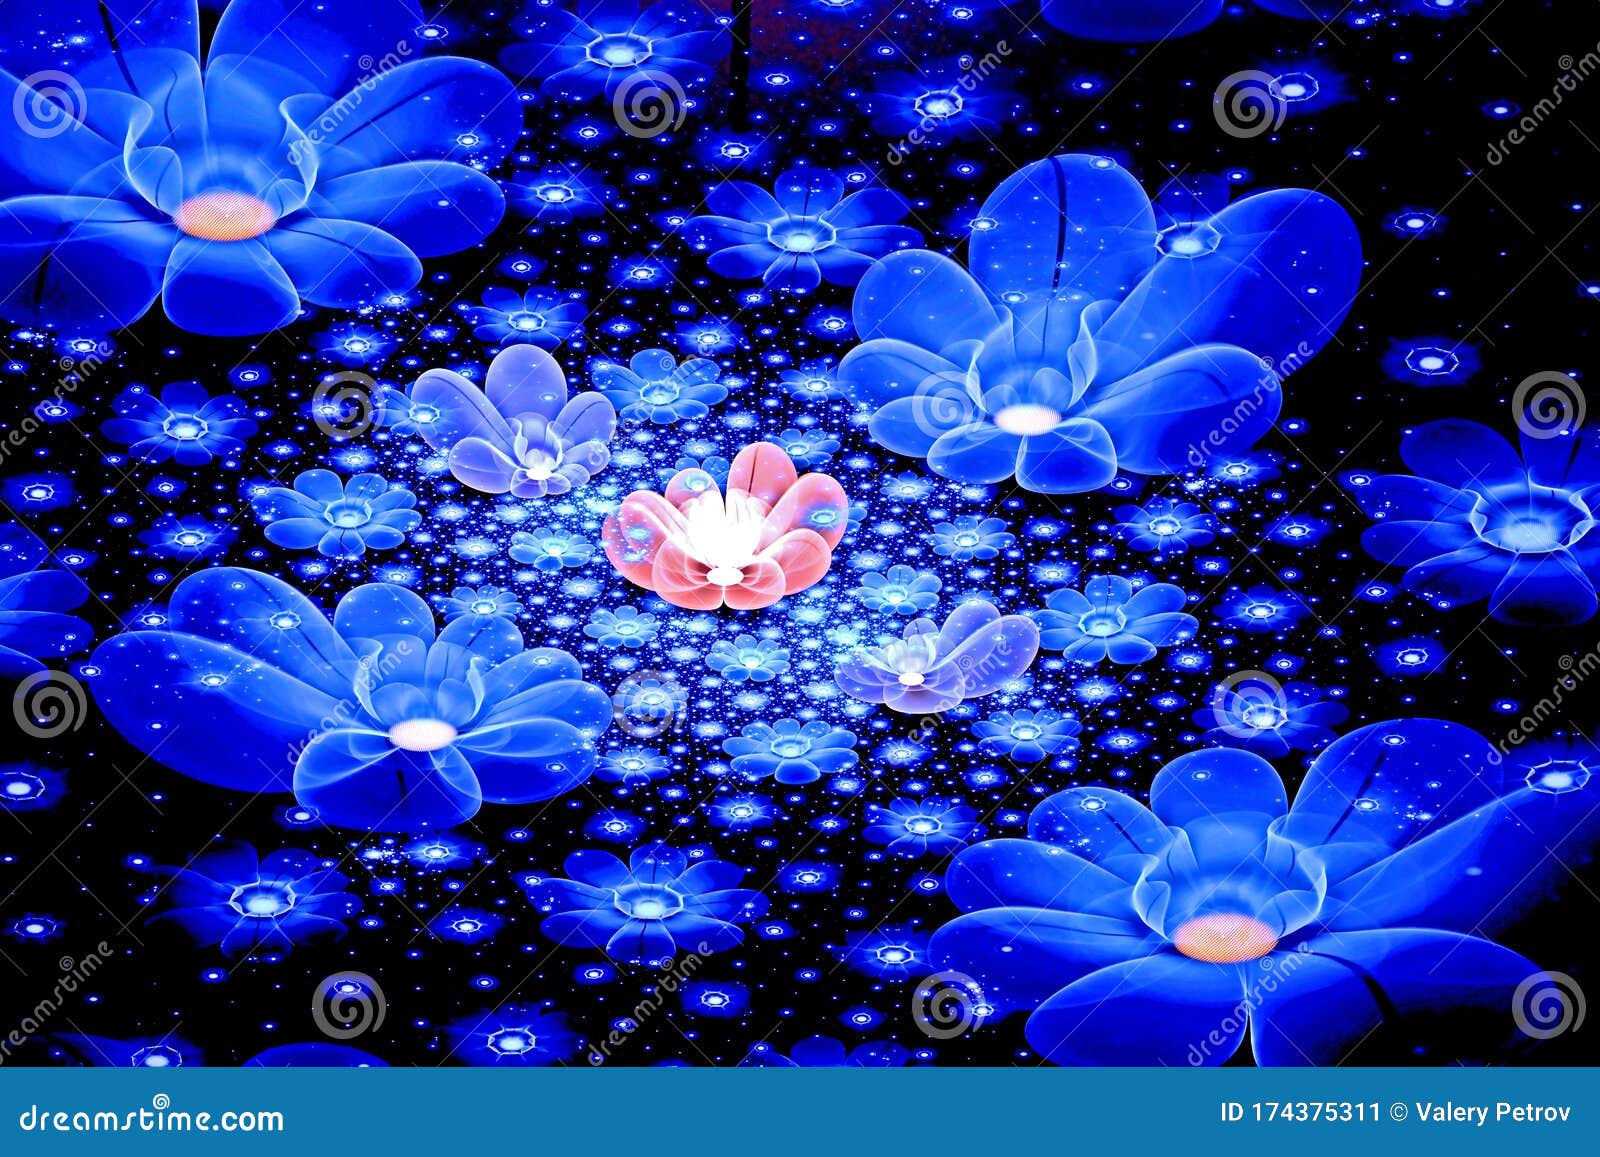 Abstract Fractal 3d Space Blue Flowers Against a Dark Beautiful ...